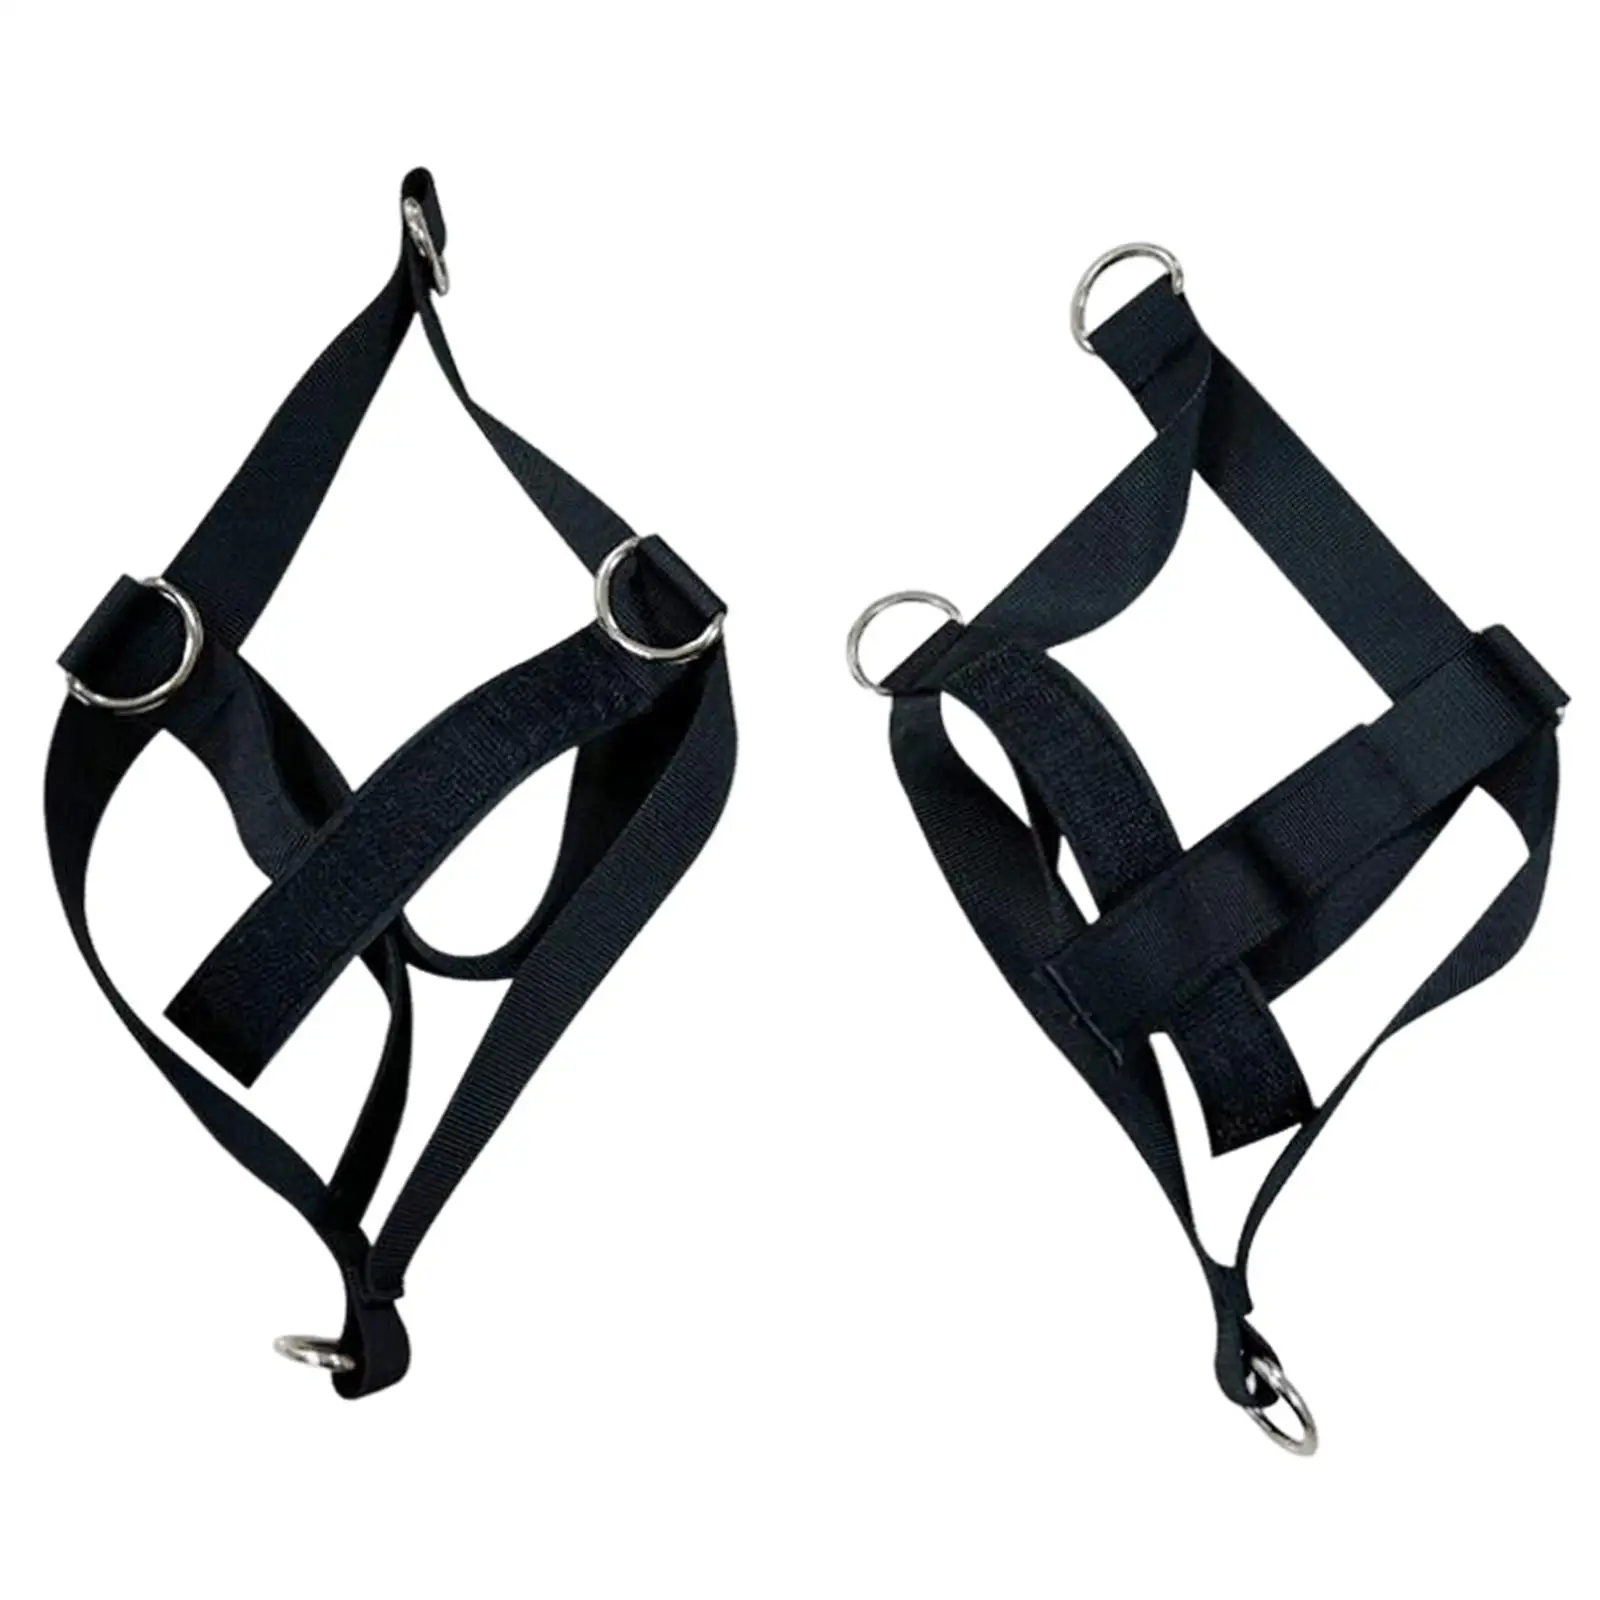 2 Pieces Adjustable Foot Strap with 4 connecting Points Multipurpose Women Men Nylon Resistance Band for Bodybuilding Fitness